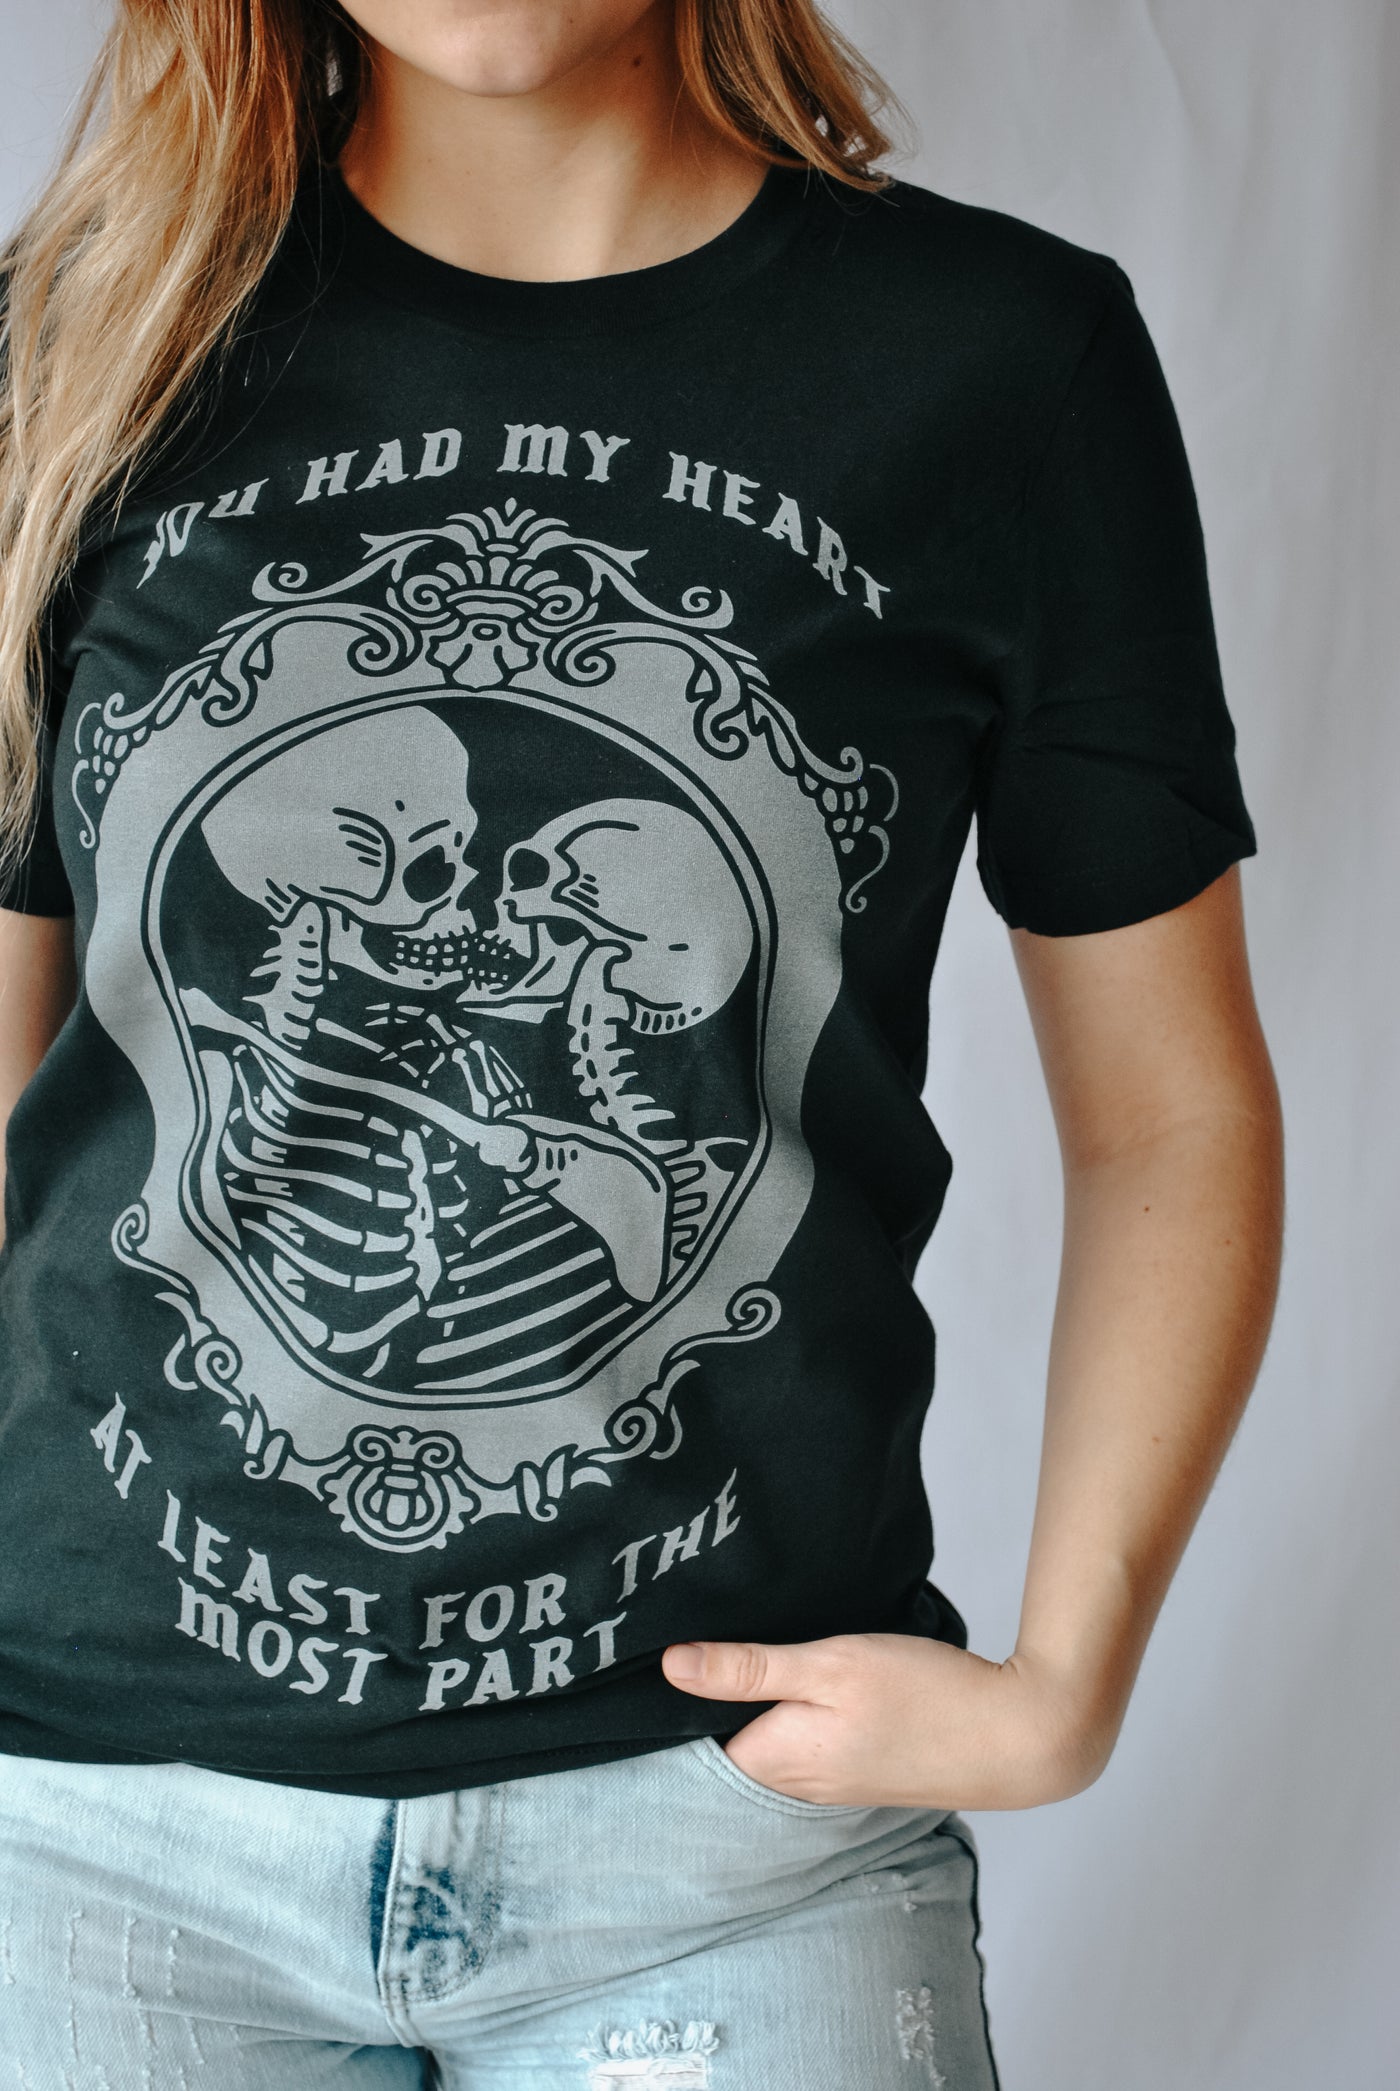 You had my heart, at least for the most part tee